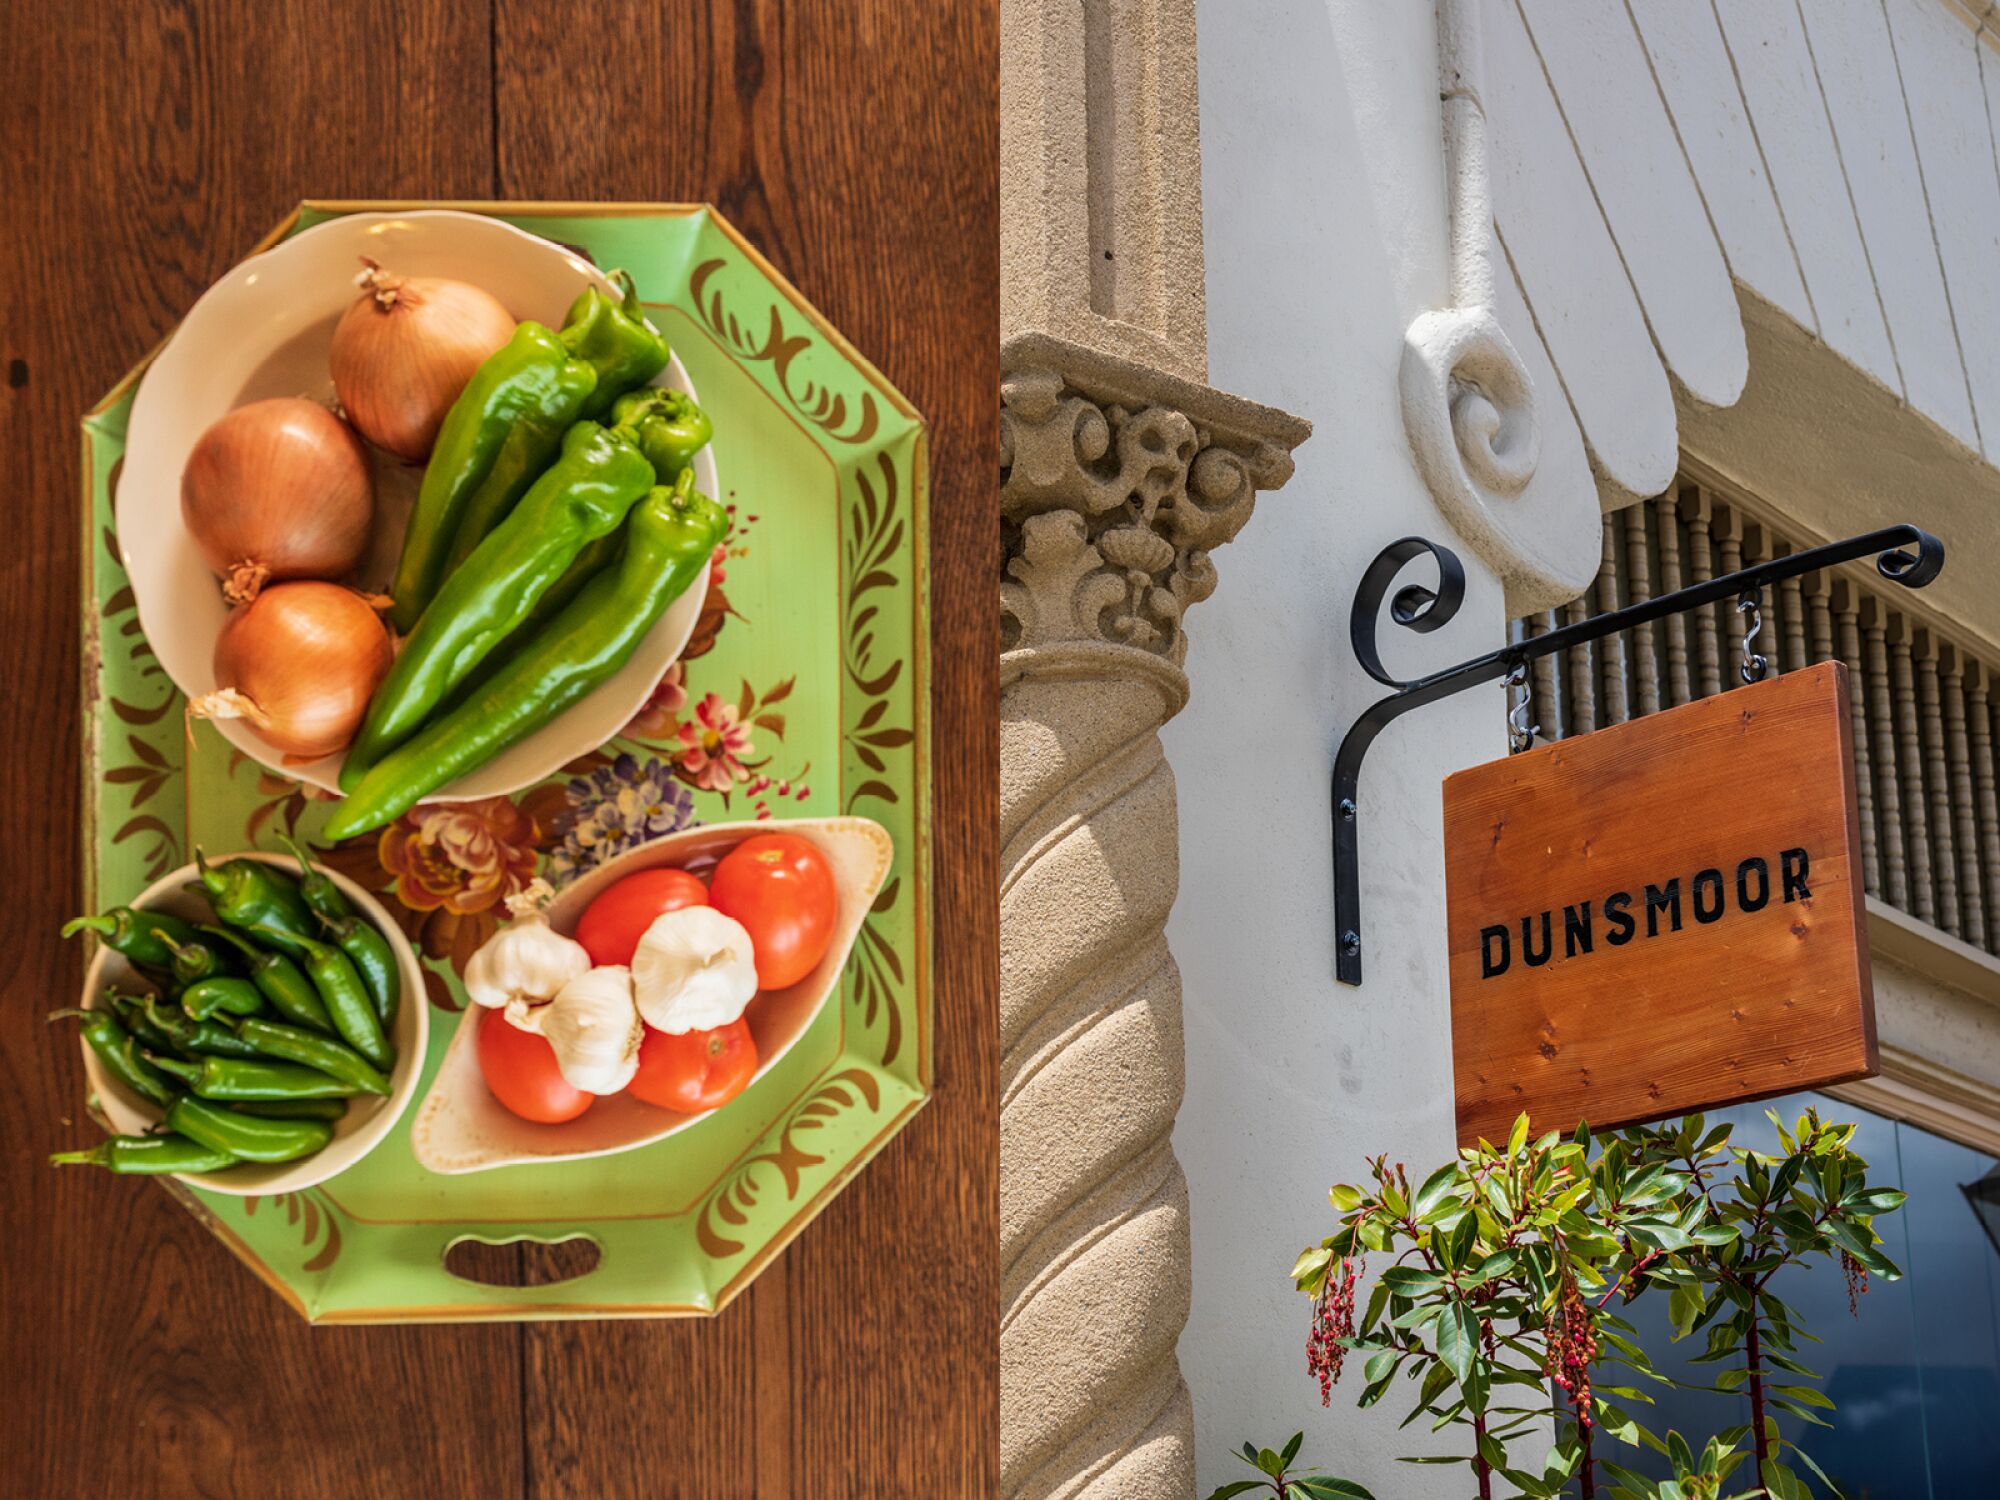 A plate of whole chiles, onions, tomatoes and garlic, left, and the sign outside Dunsmoor restaurant, right.